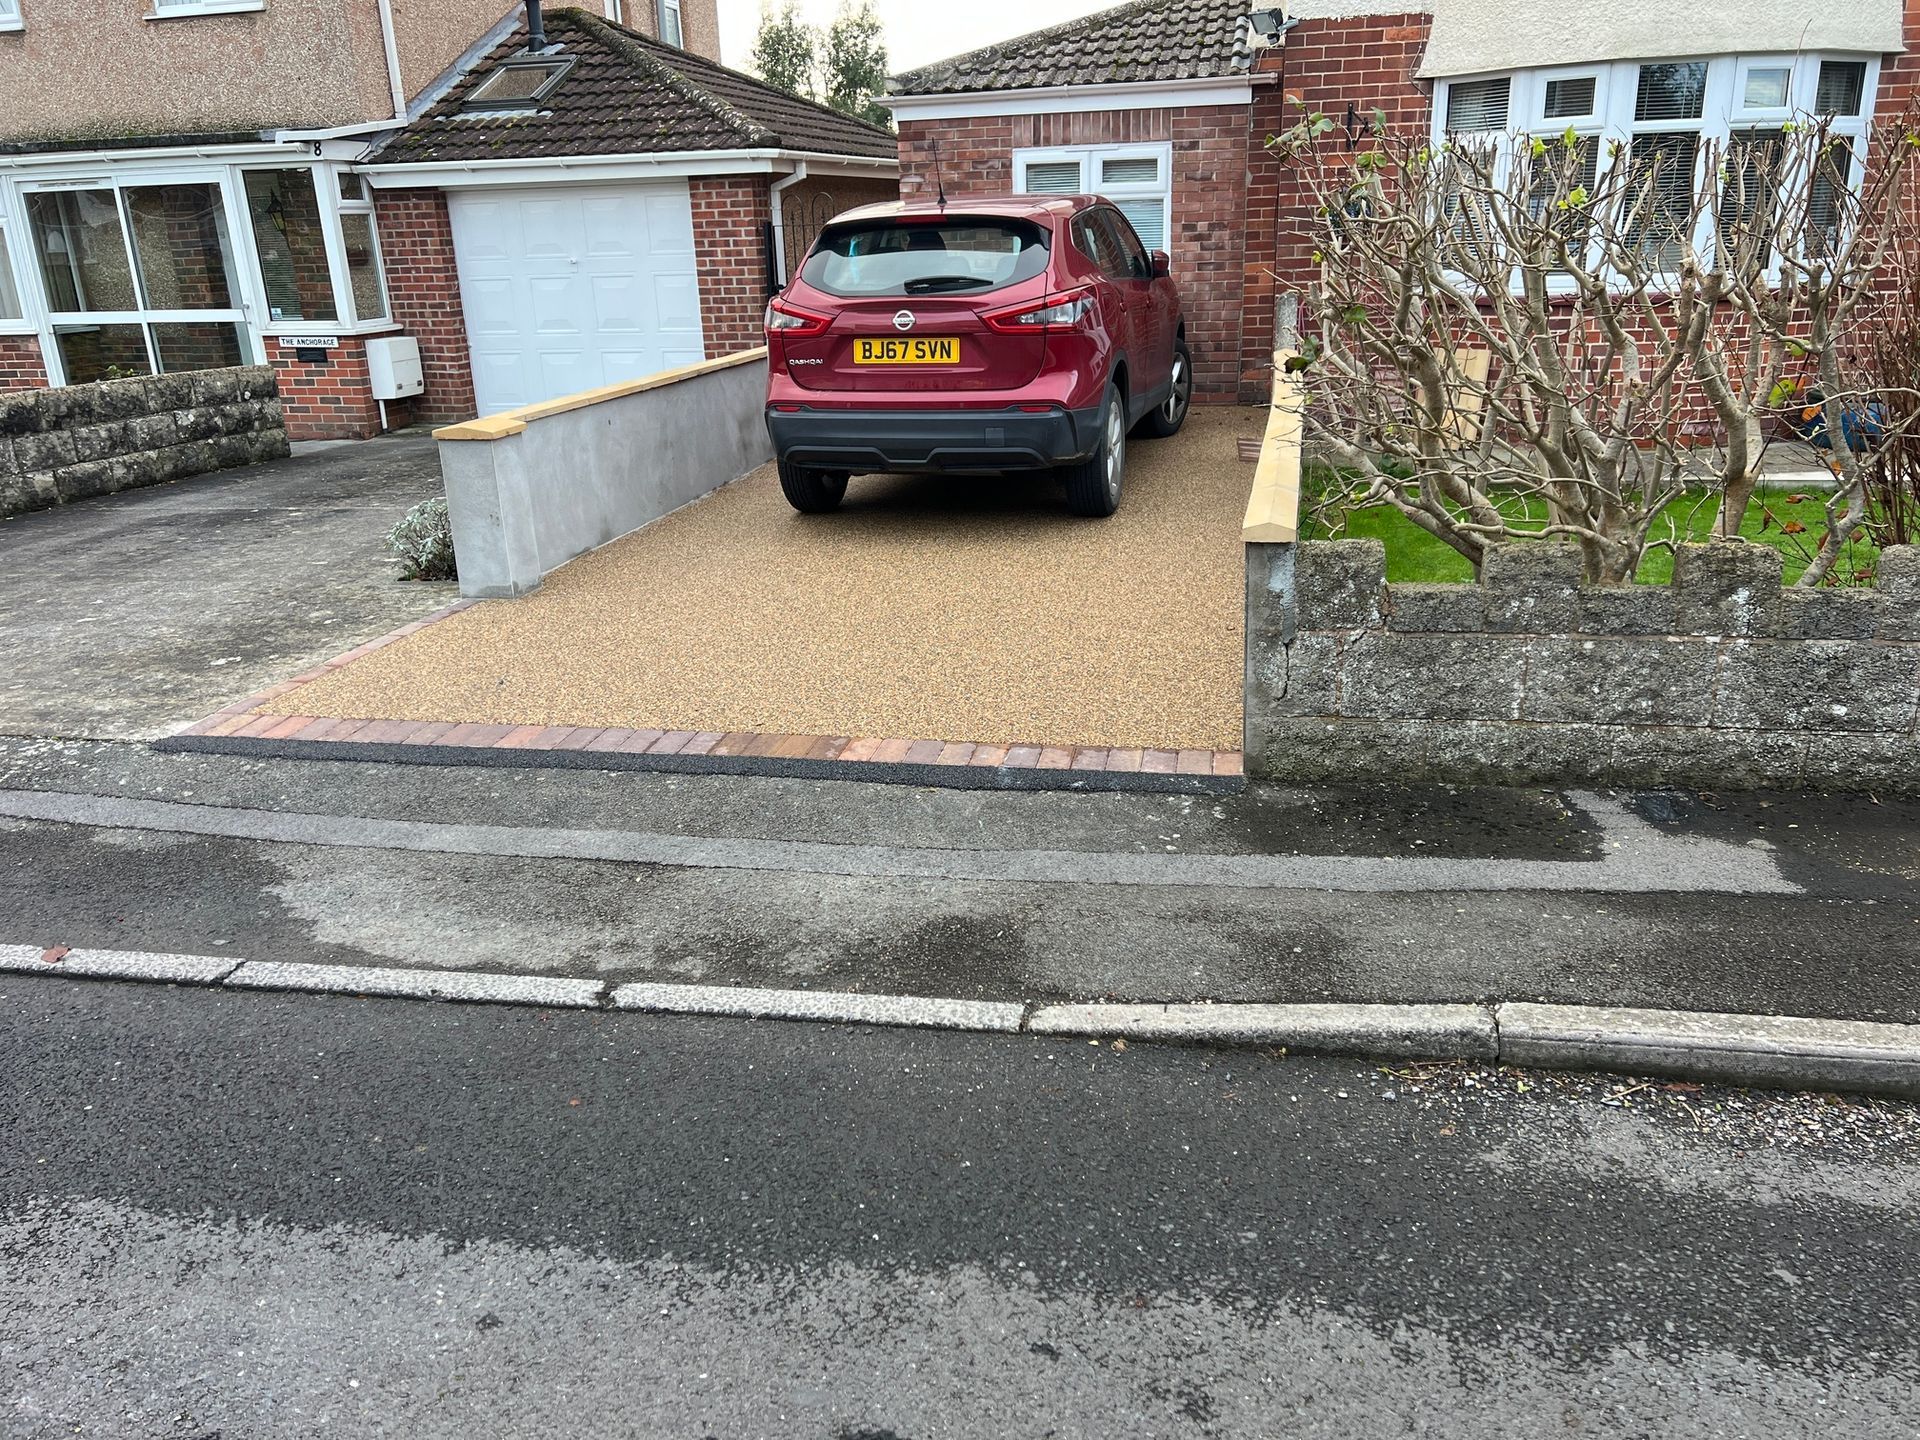 A red car parked on a freshly installed oat coloured resin driveway, with a house either side.